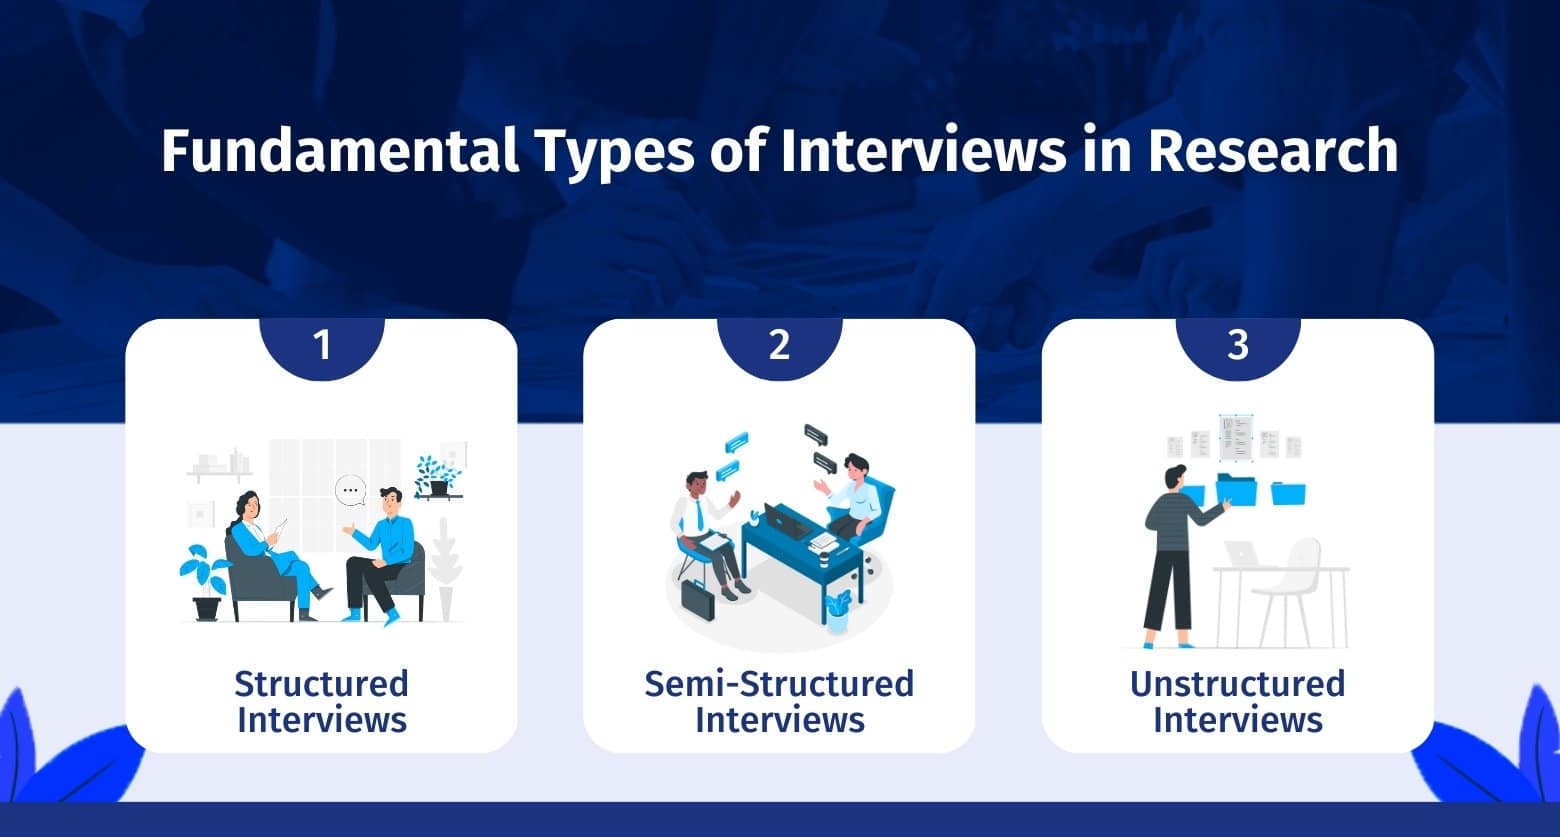 1 CONDUCTING AN INVESTIGATIVE INTERVIEW. 2 PURPOSE OF INTERVIEW TO